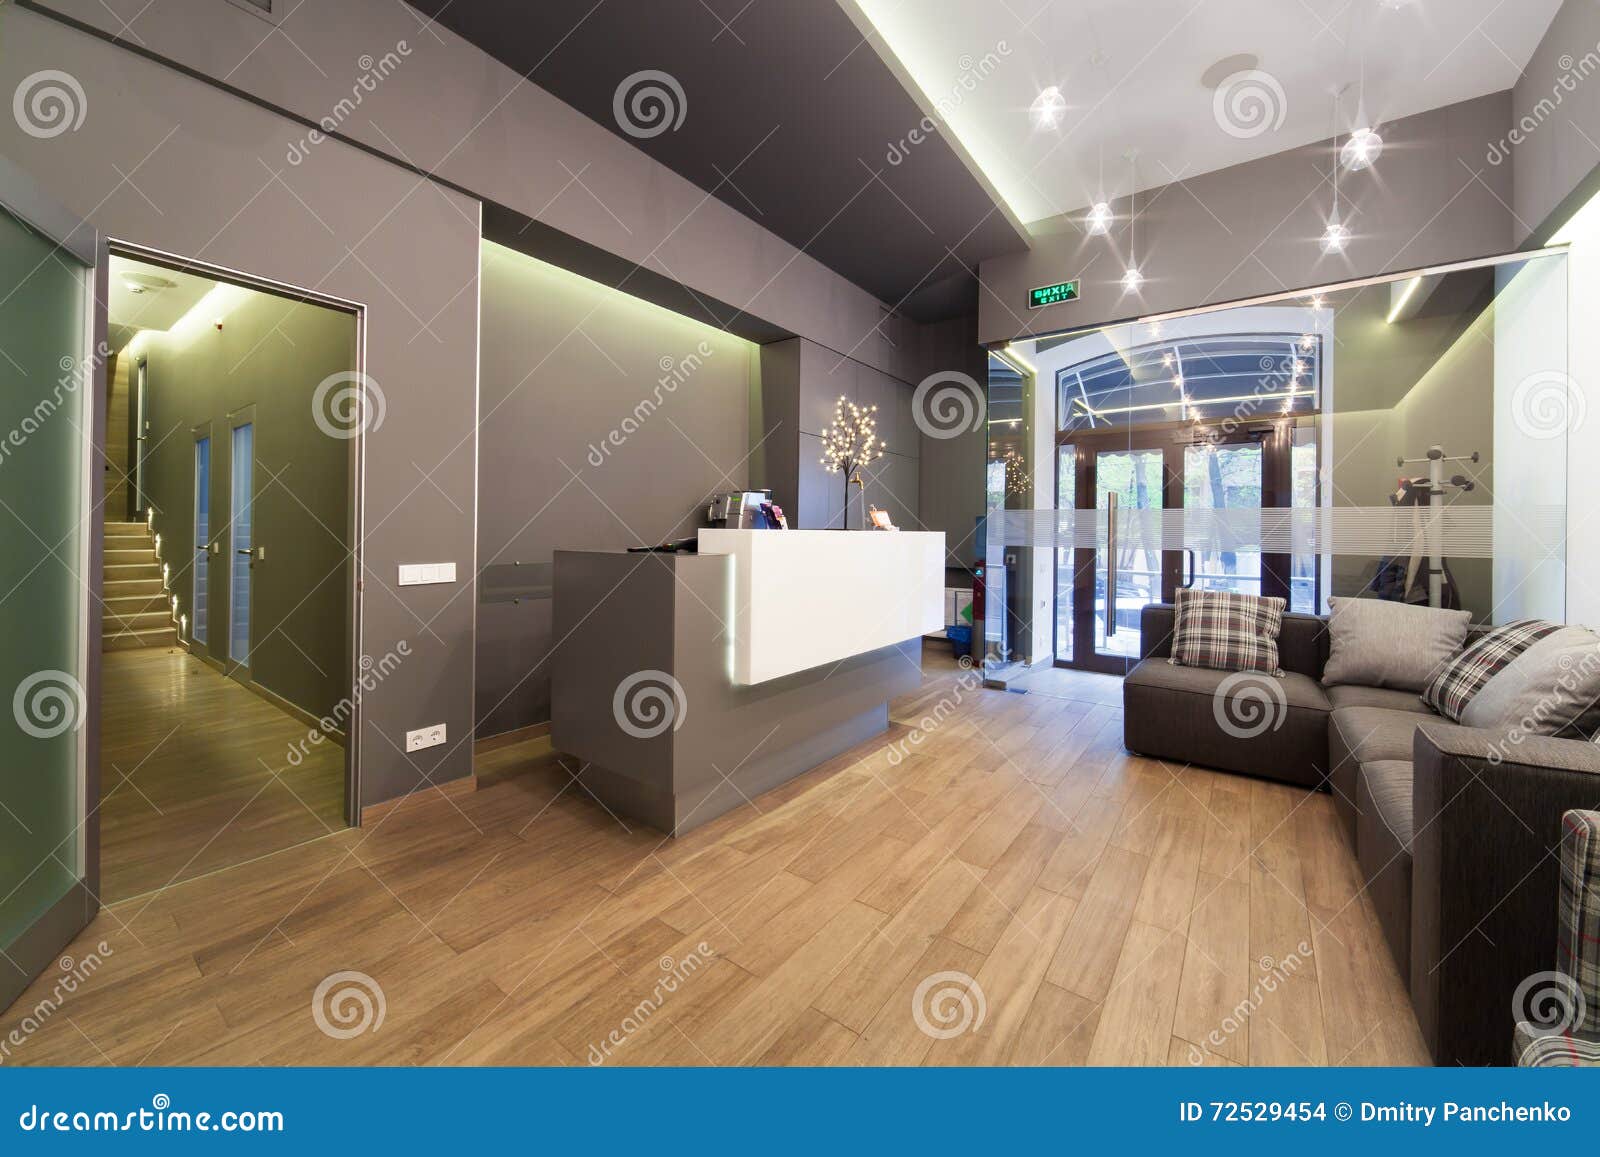 lobby entrance with reception desk in a dental clinic.